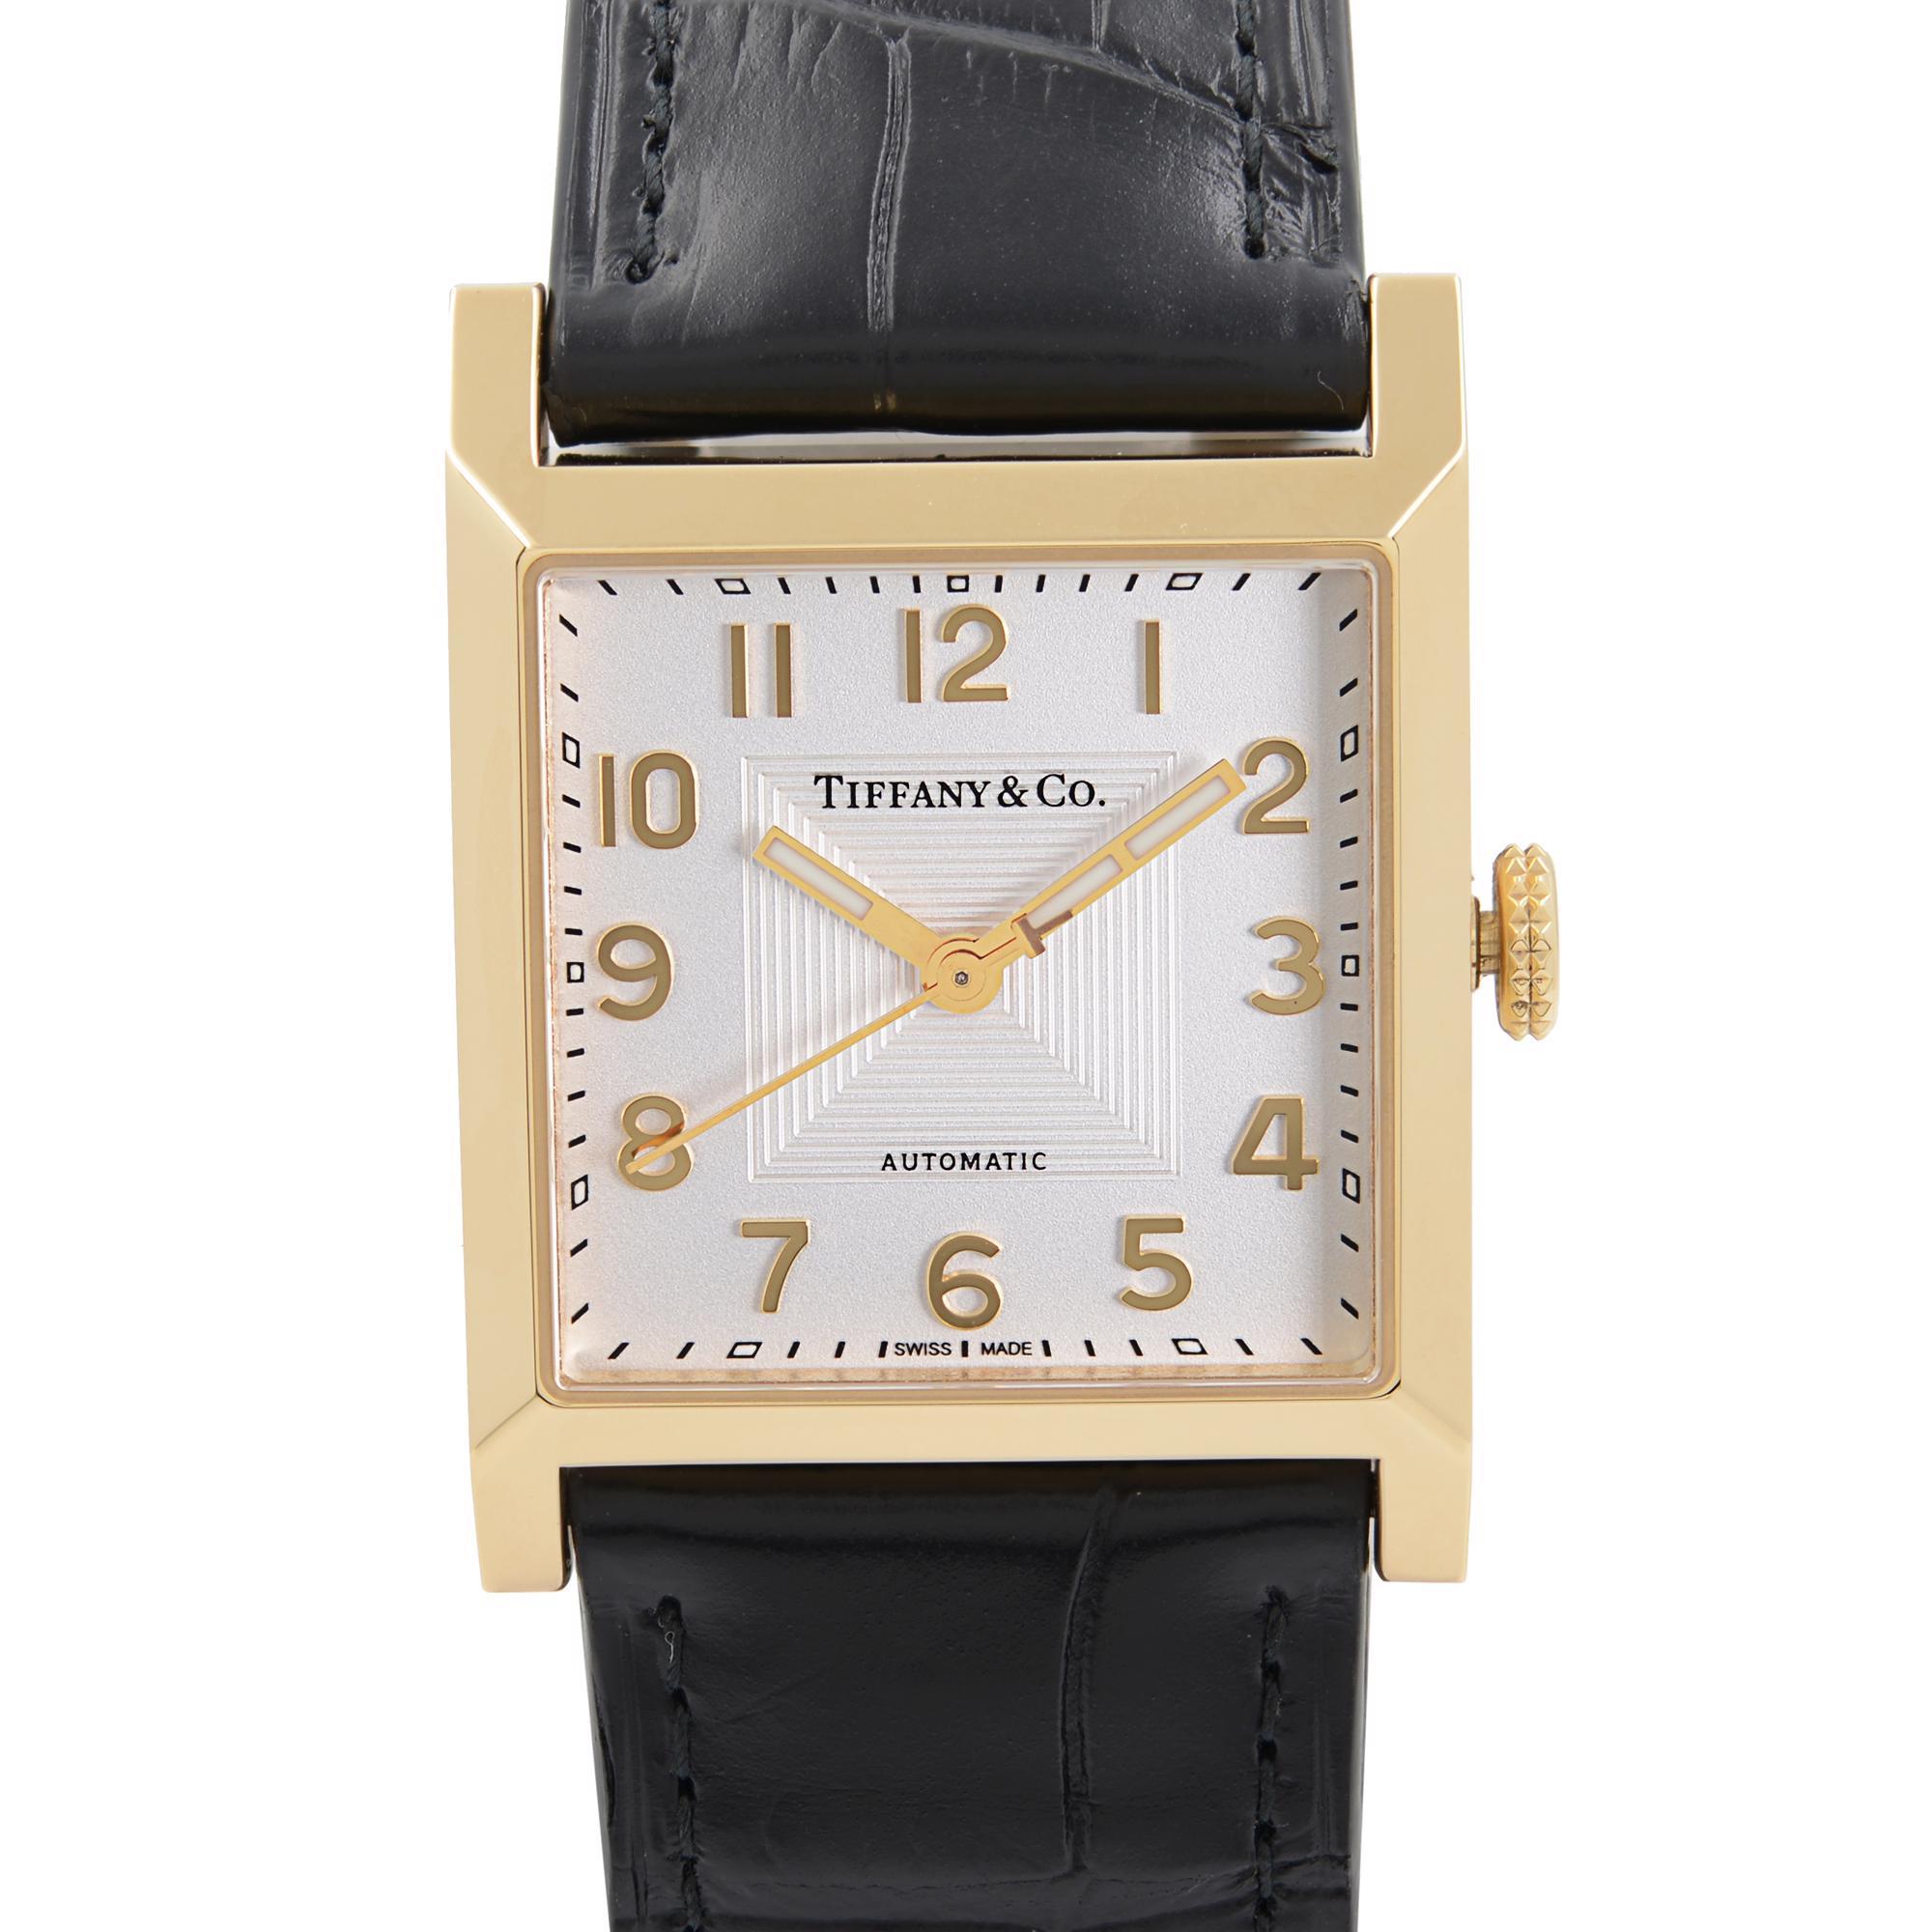 Unworn Tiffany & Co. 1837 Makers 27mm 18k Gold White Dial Automatic Ladies Watch. This Beautiful Timepiece is Powered by a Mechanical (Automatic) Movement with exceptional Features: an 18k Yellow Gold Case with a Black Leather Strap. Fixed 18k